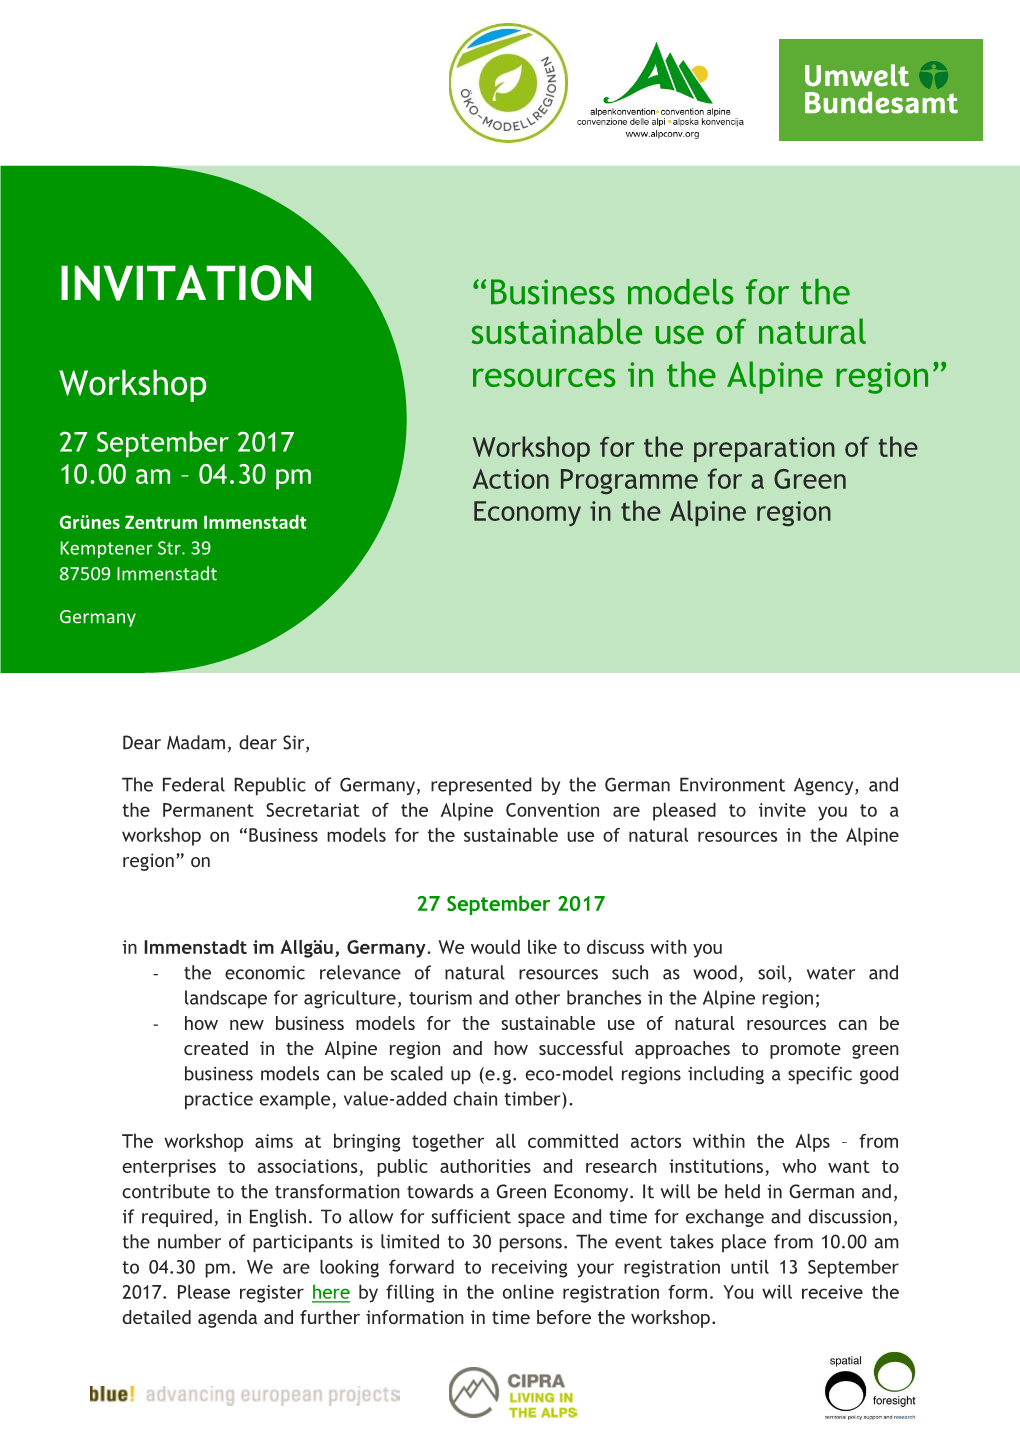 INVITATION “Business Models for the Sustainable Use of Natural